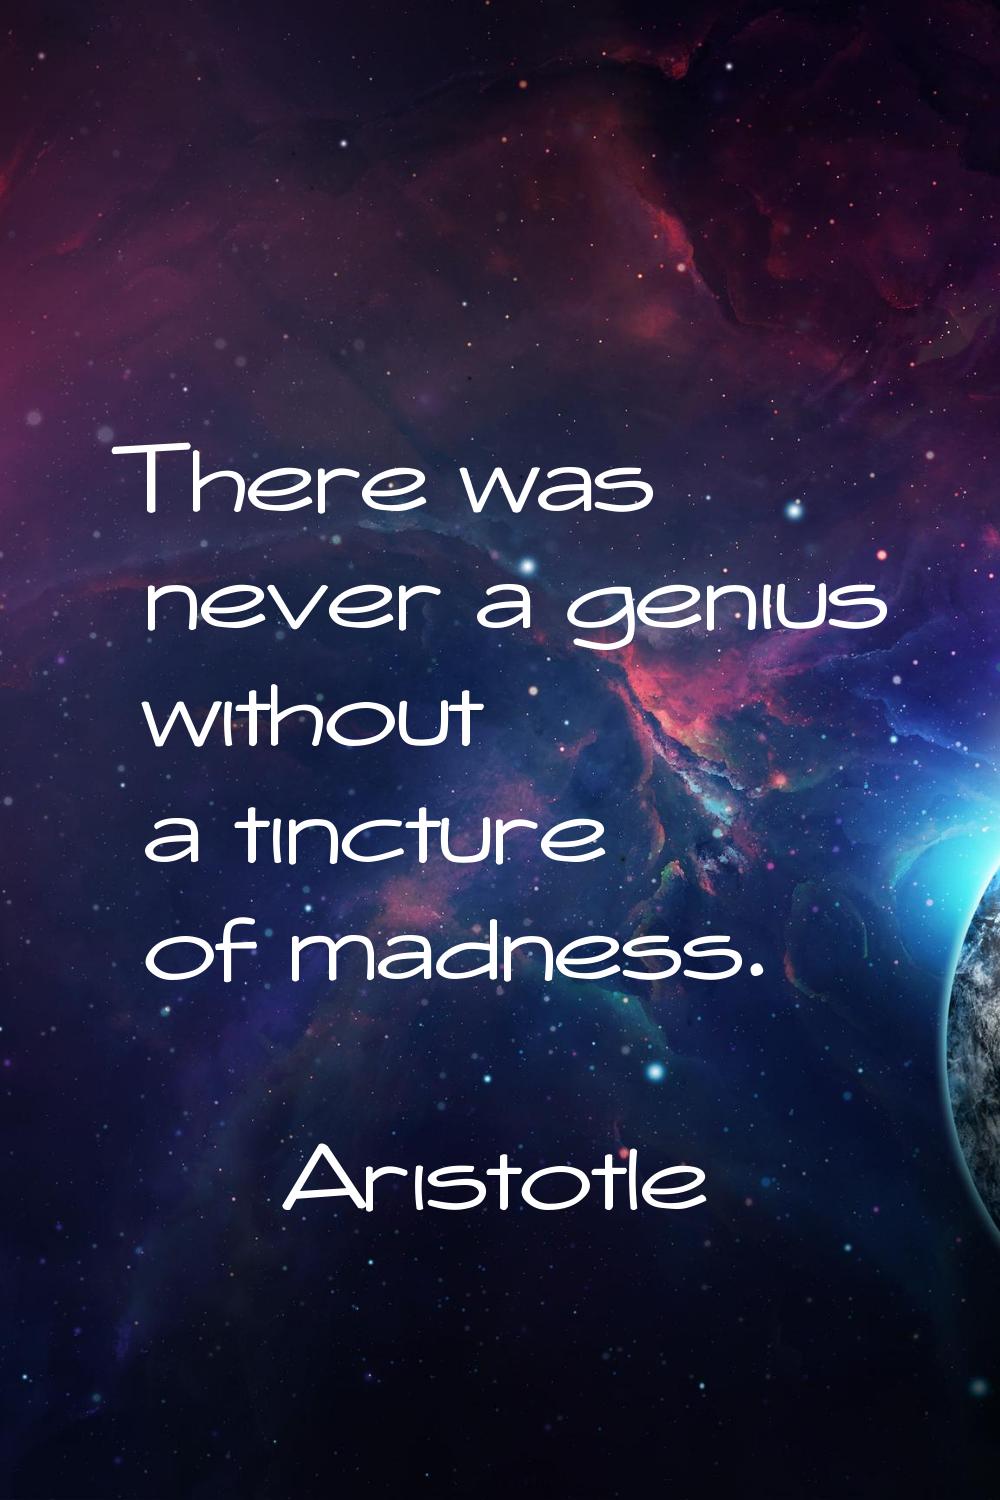 There was never a genius without a tincture of madness.